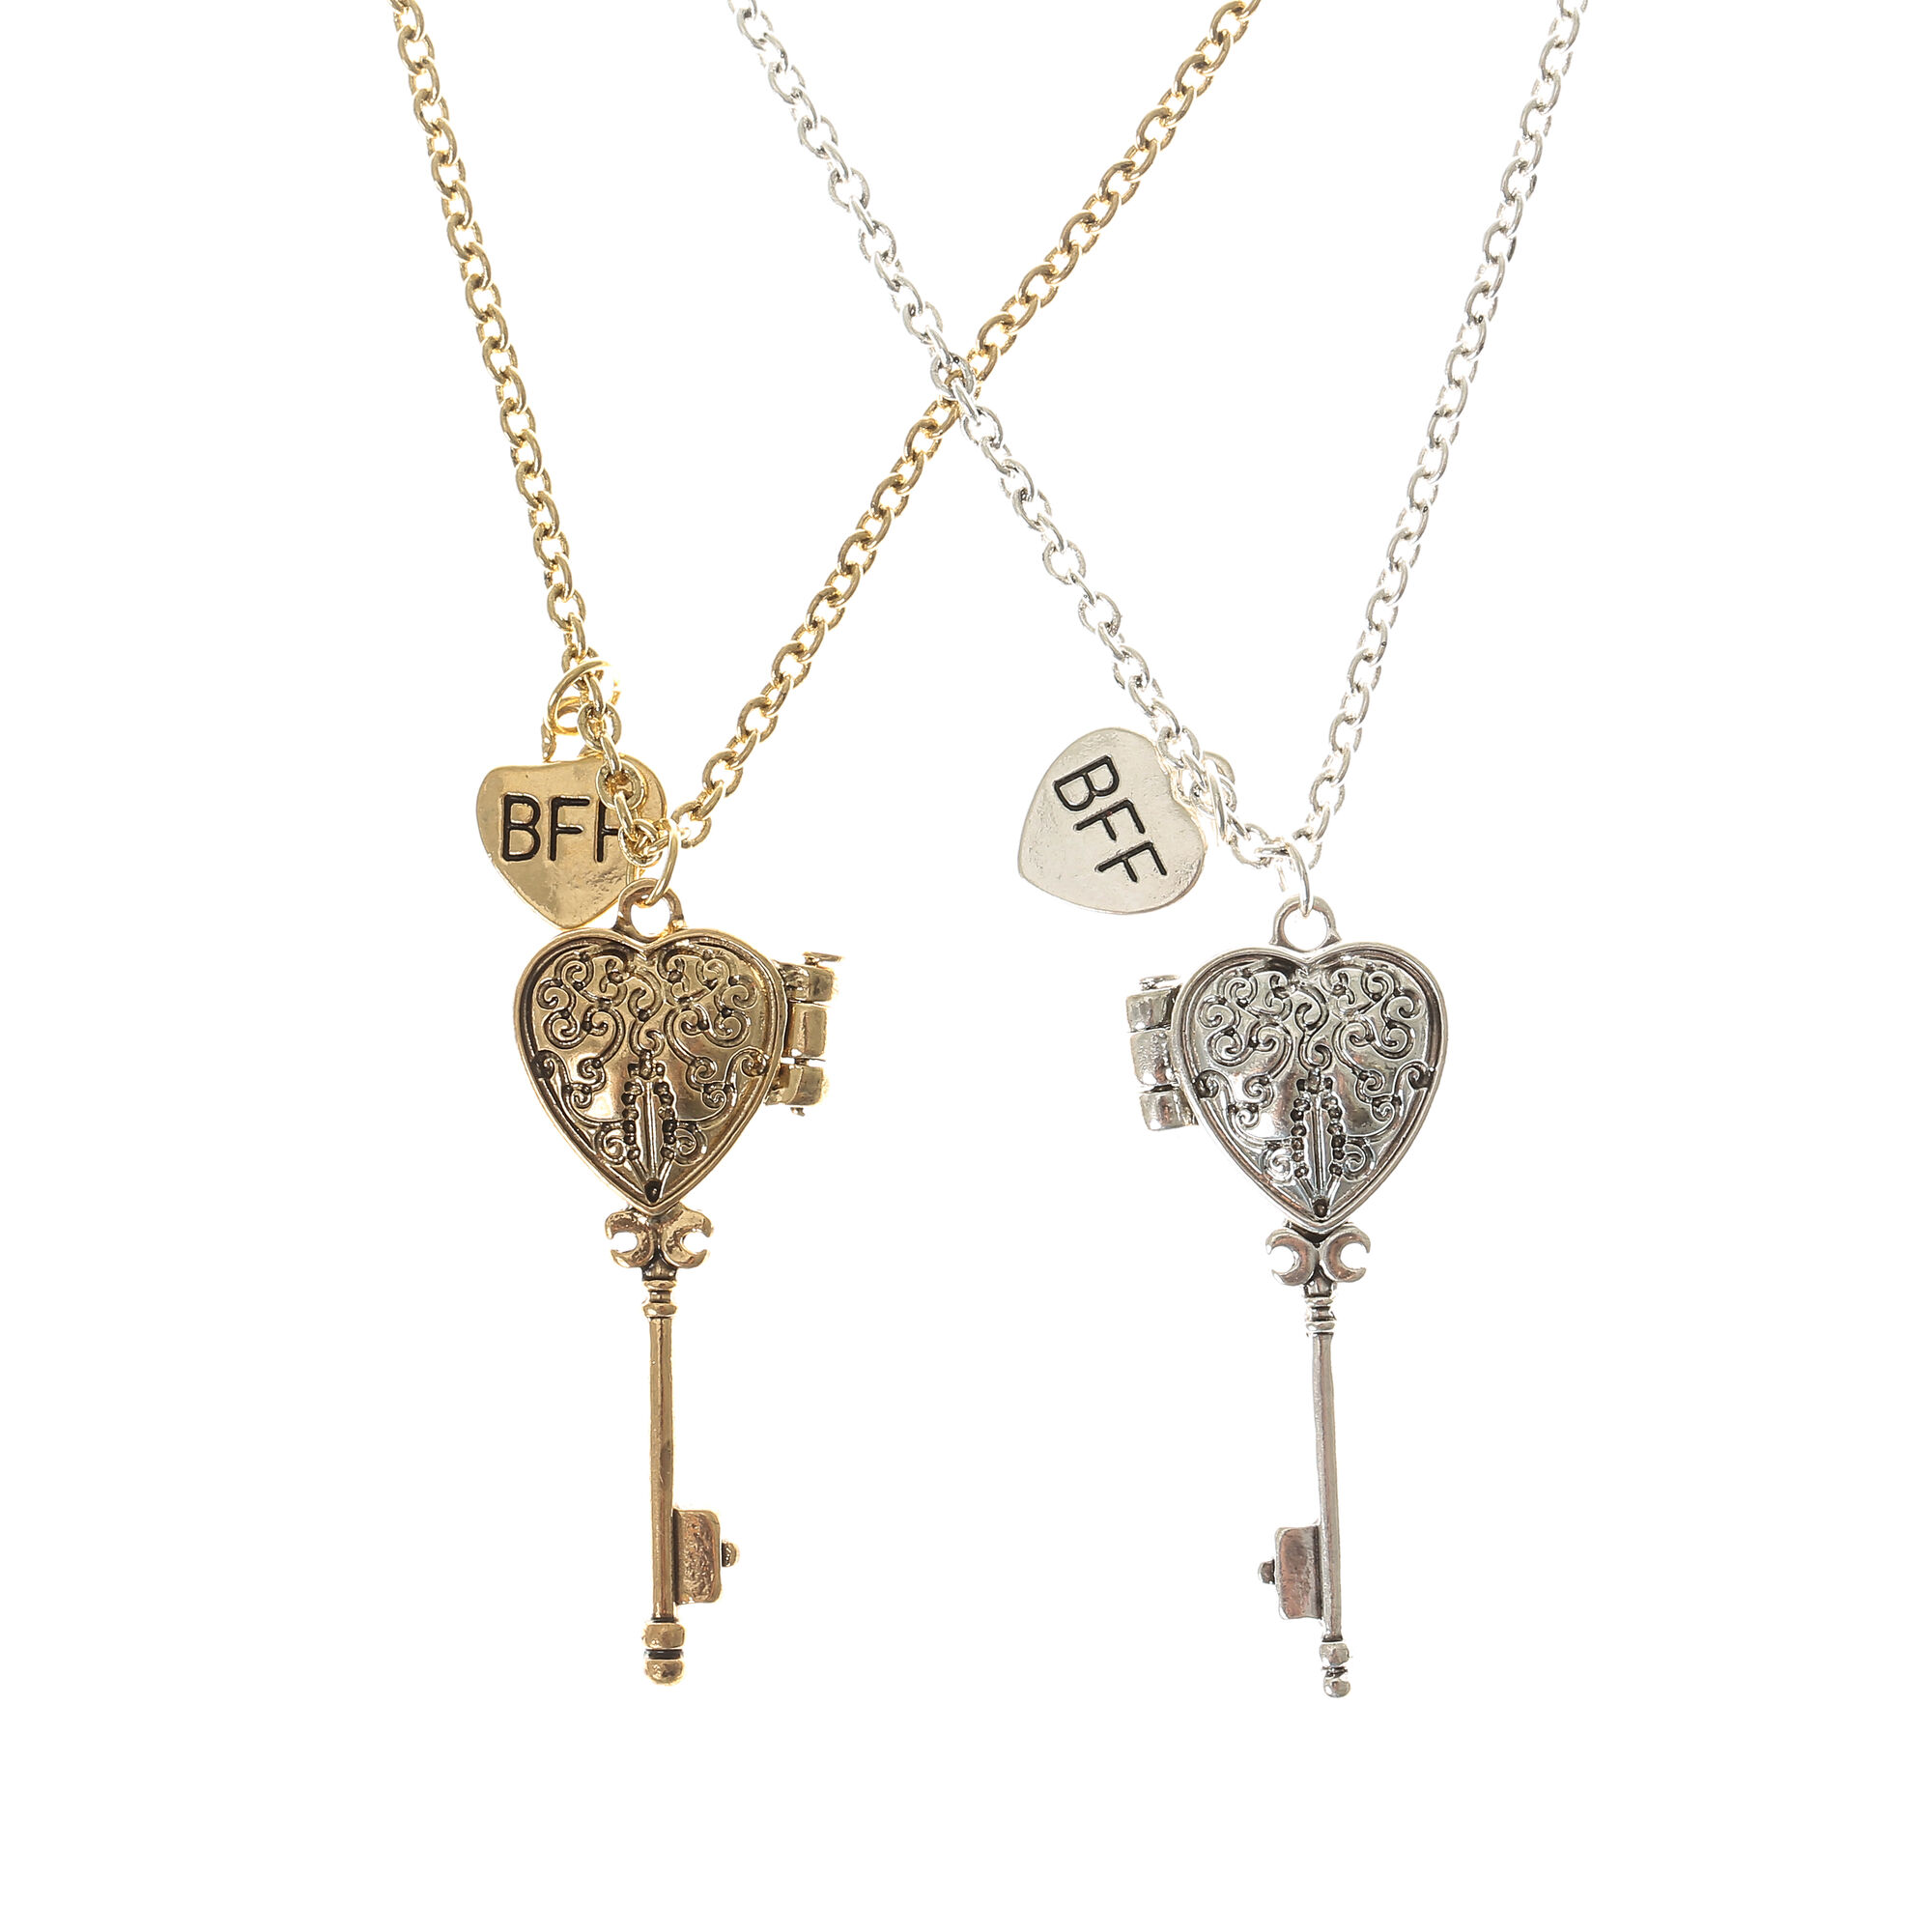 View Claires Mixed Metal Best Friends Heart Key Locket Necklaces 2 Pack Gold information